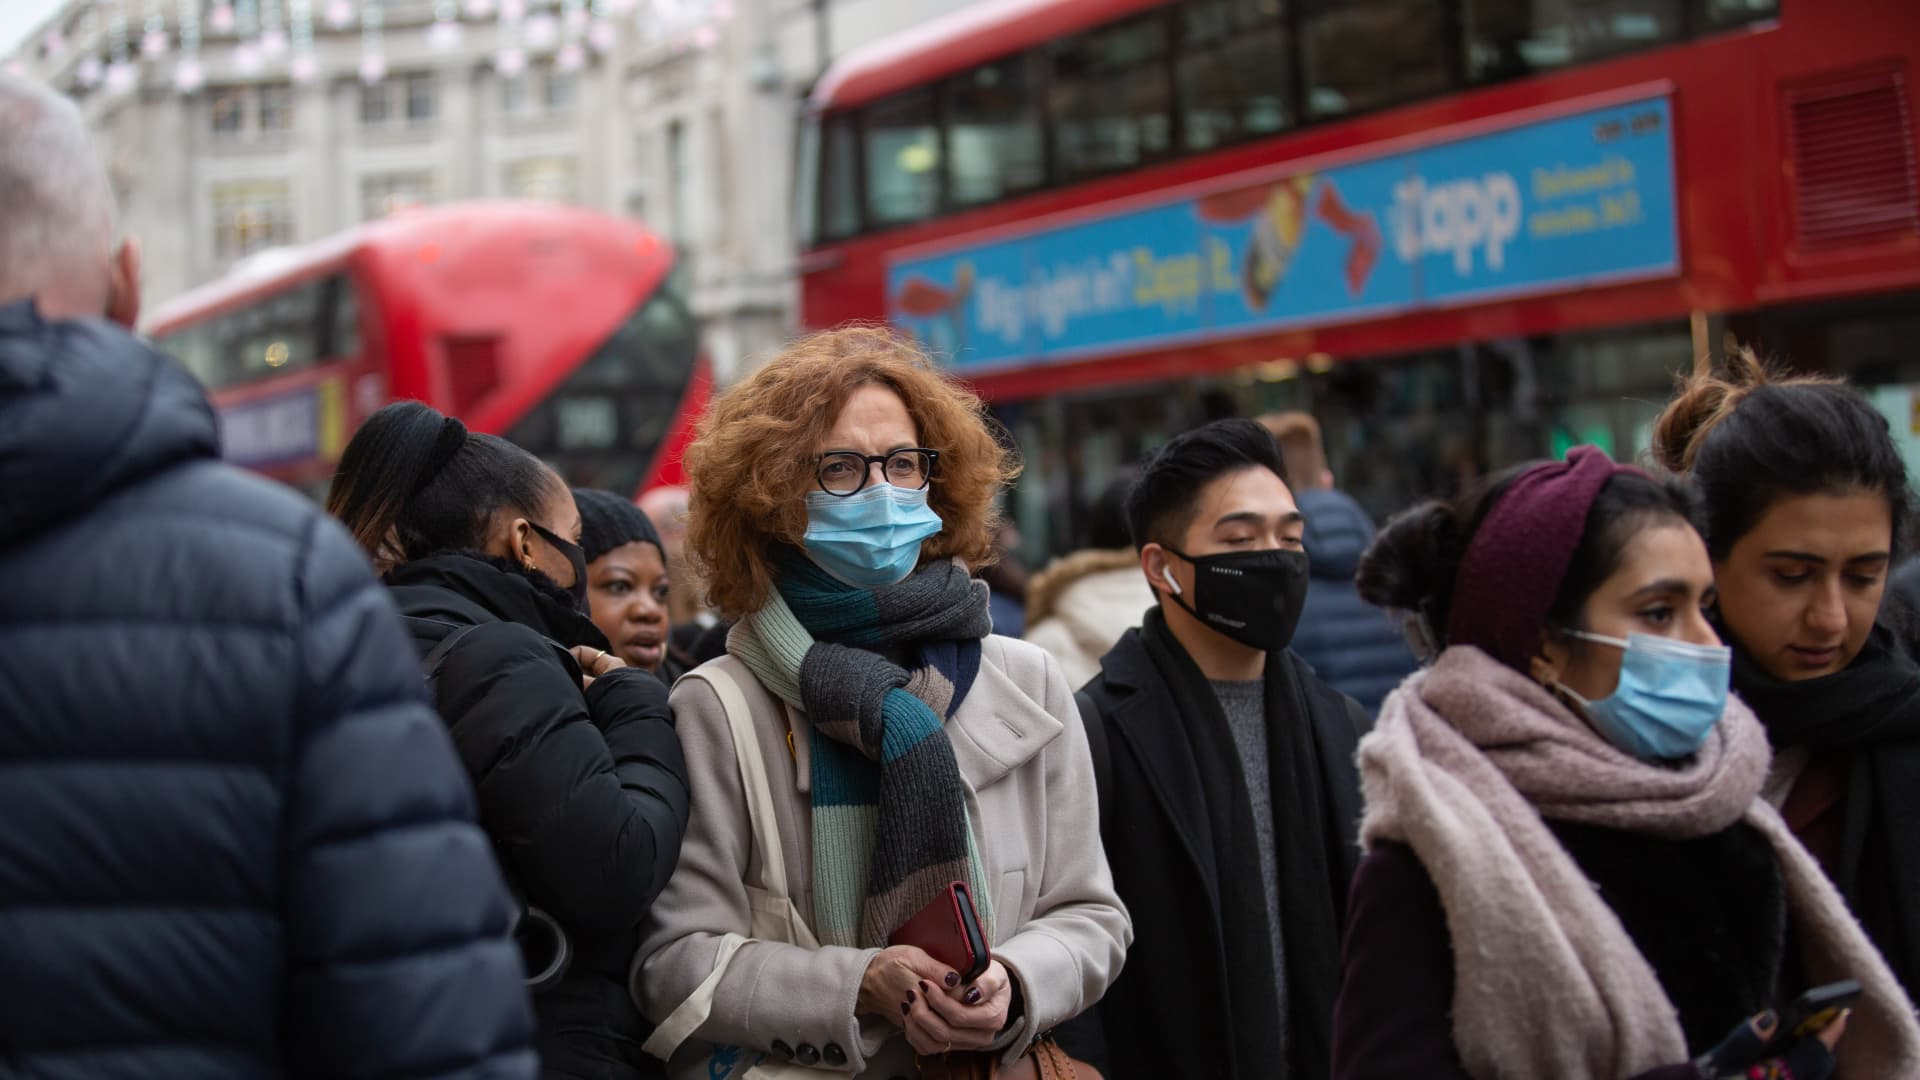 Shoppers wearing face masks as a preventive measure against the spread of Covid-19 seen walking along Oxford Circus in London.